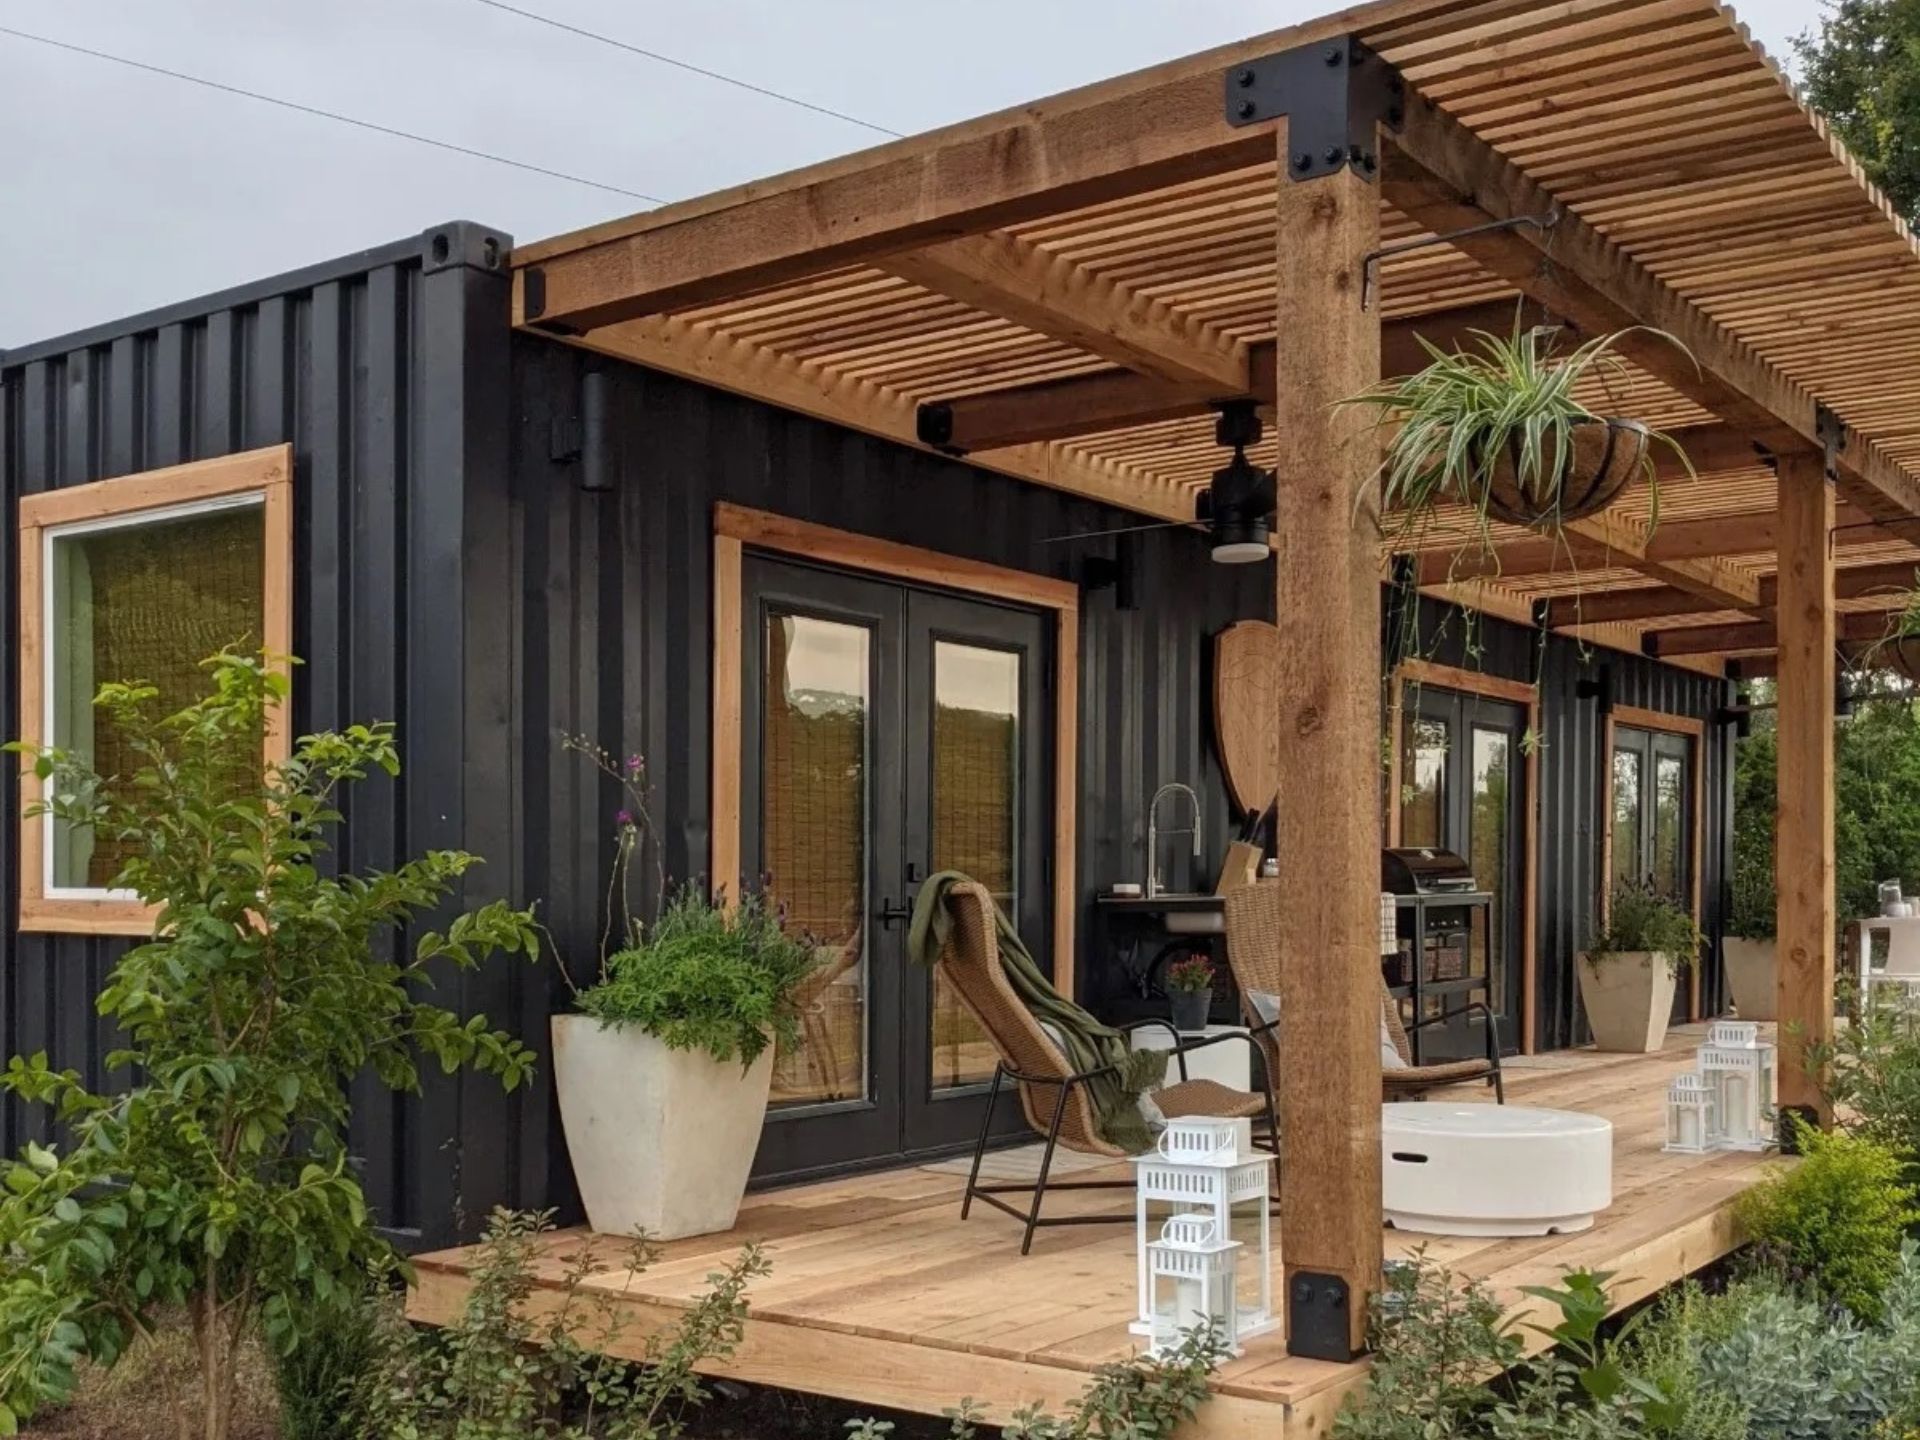 Black Joshua container home with a beautiful small wooden porch in front of it